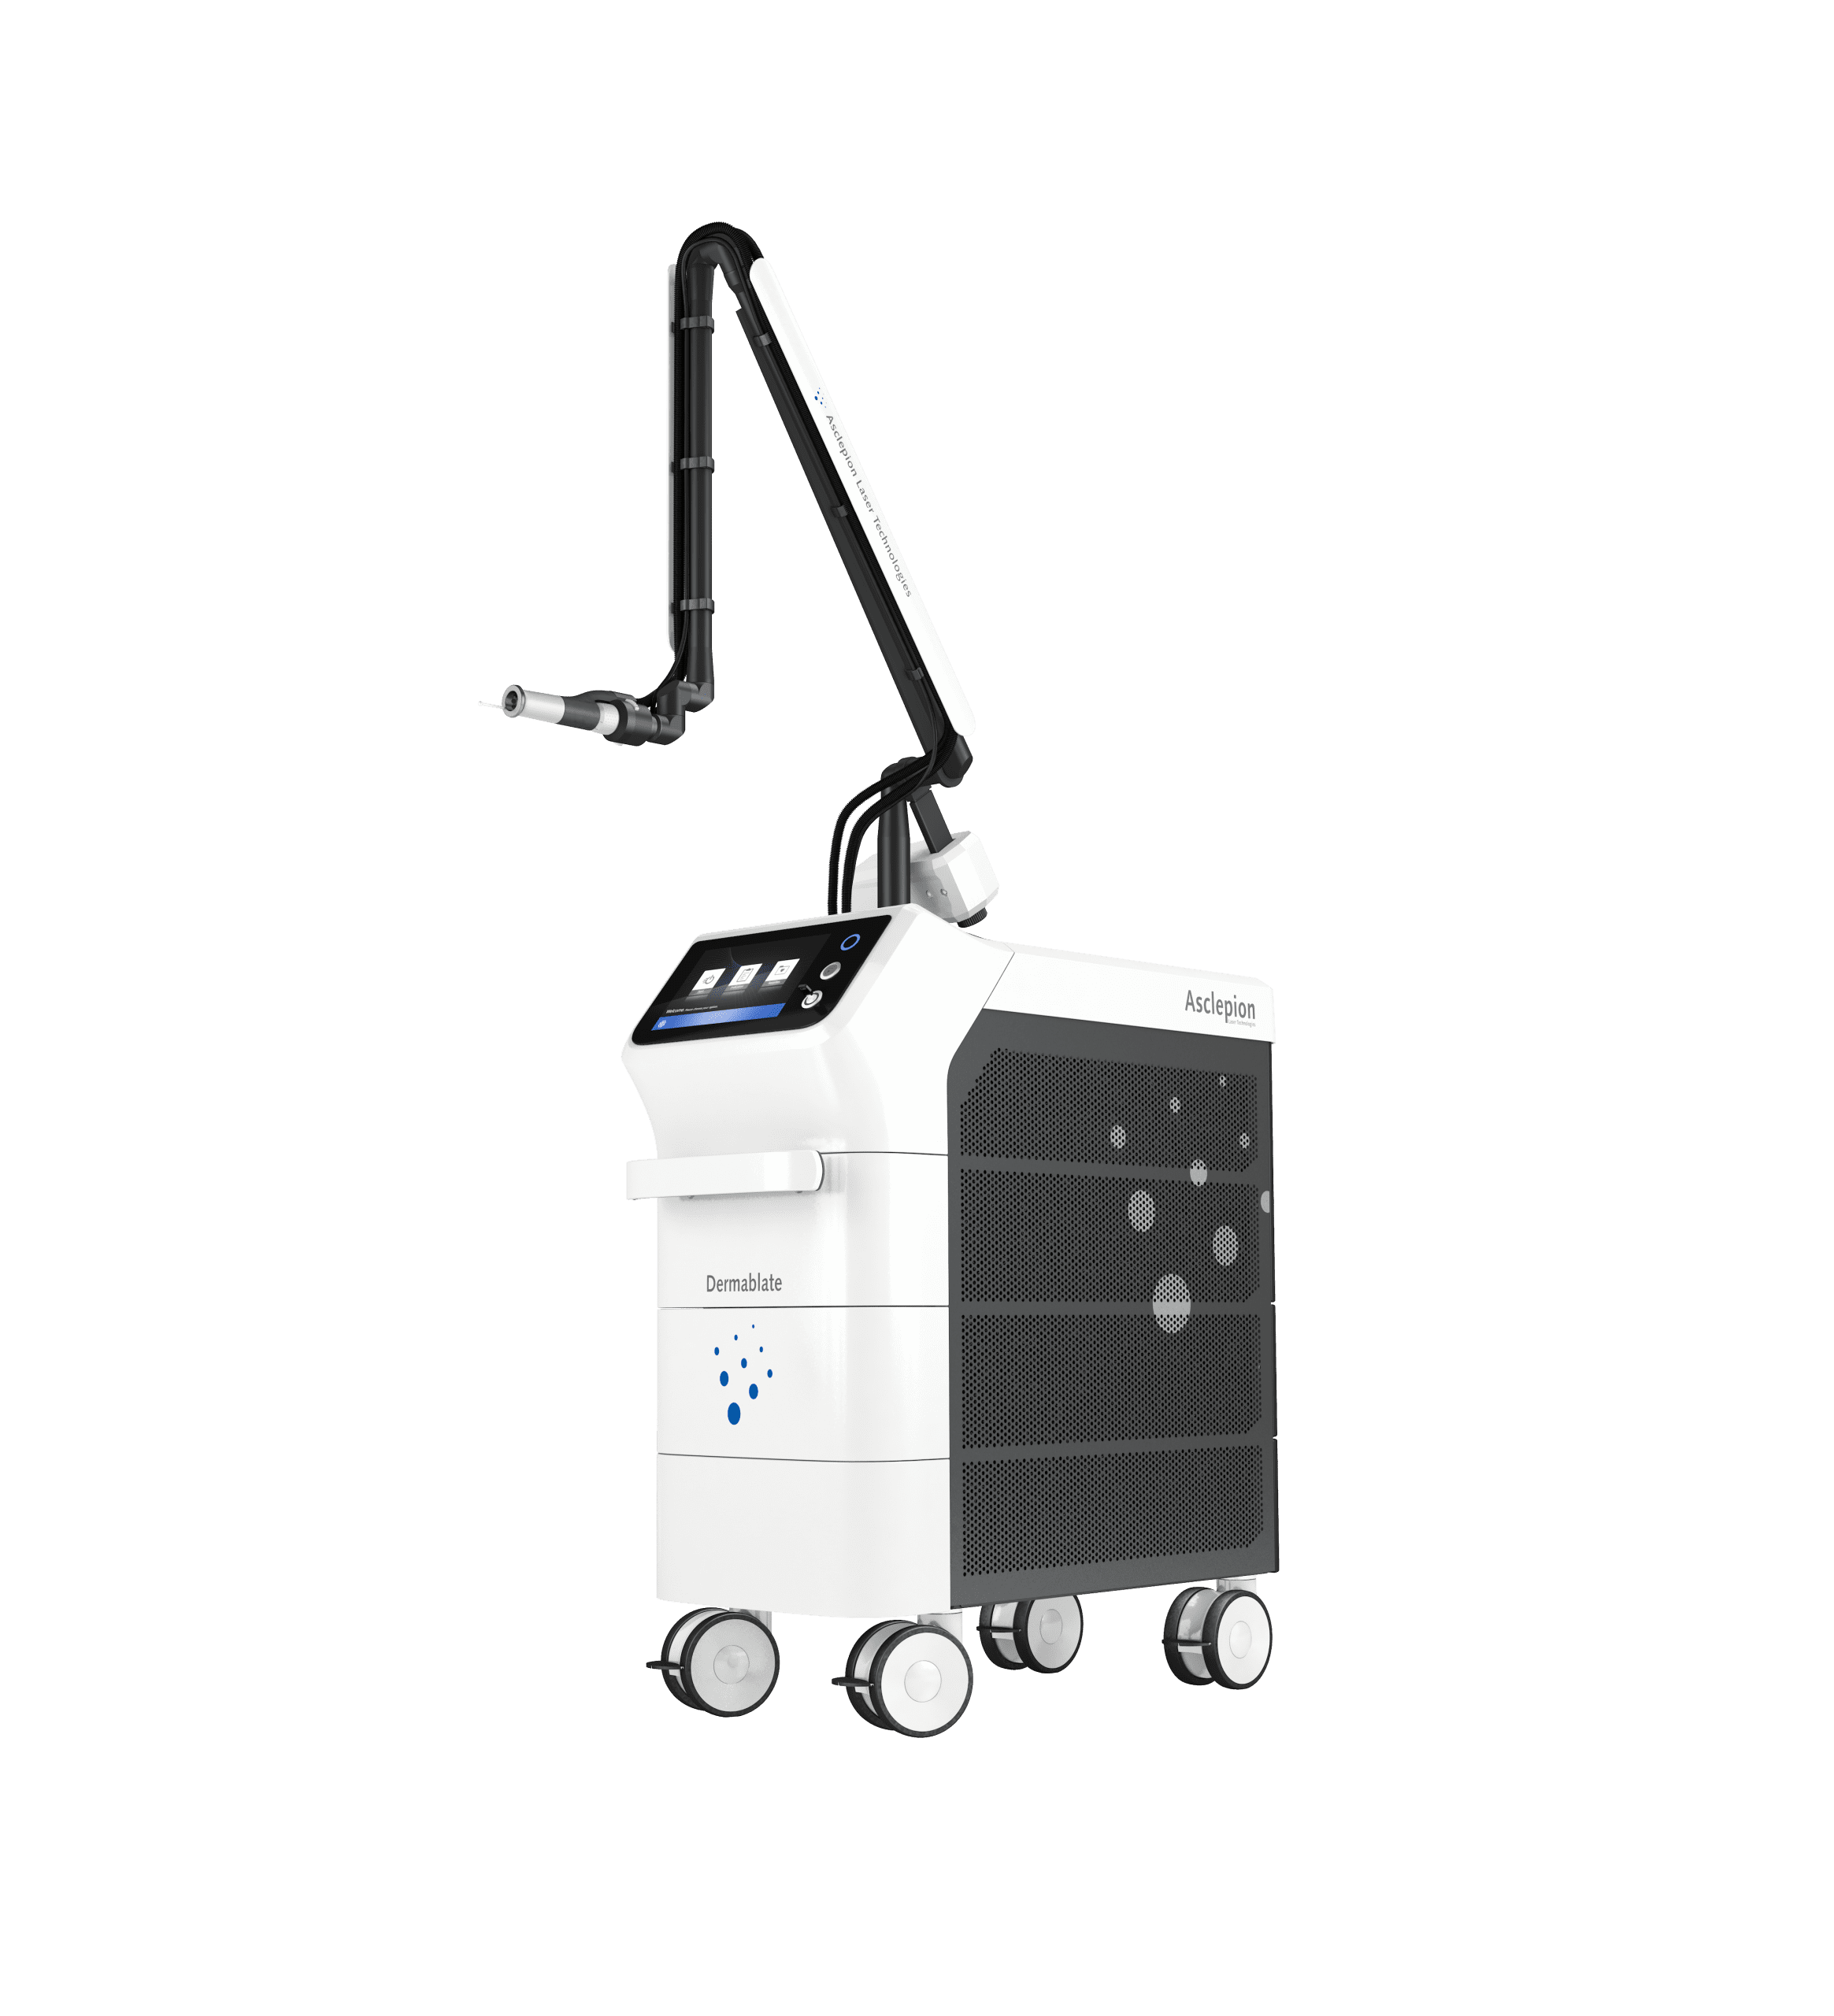 Dermablate, the latest and highest-performing Er: YAG laser